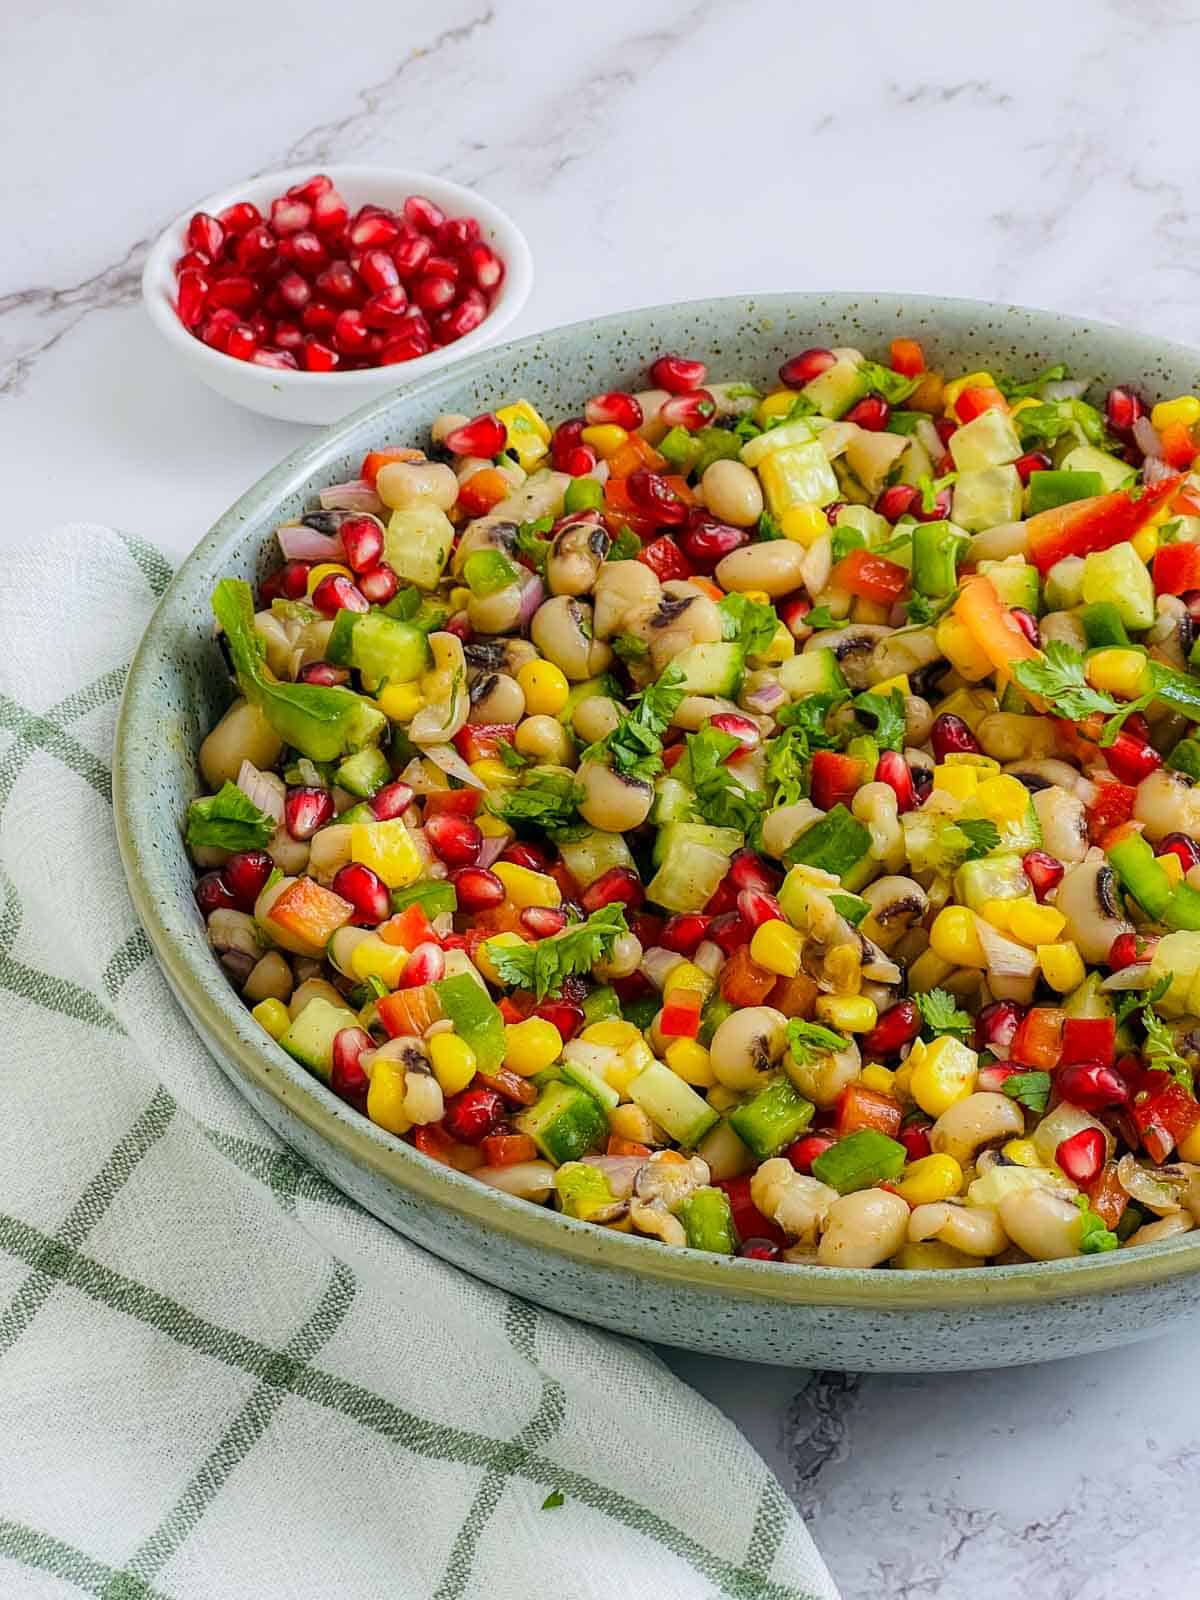 Black-eyed peas salad with pomegranate seeds in the background.